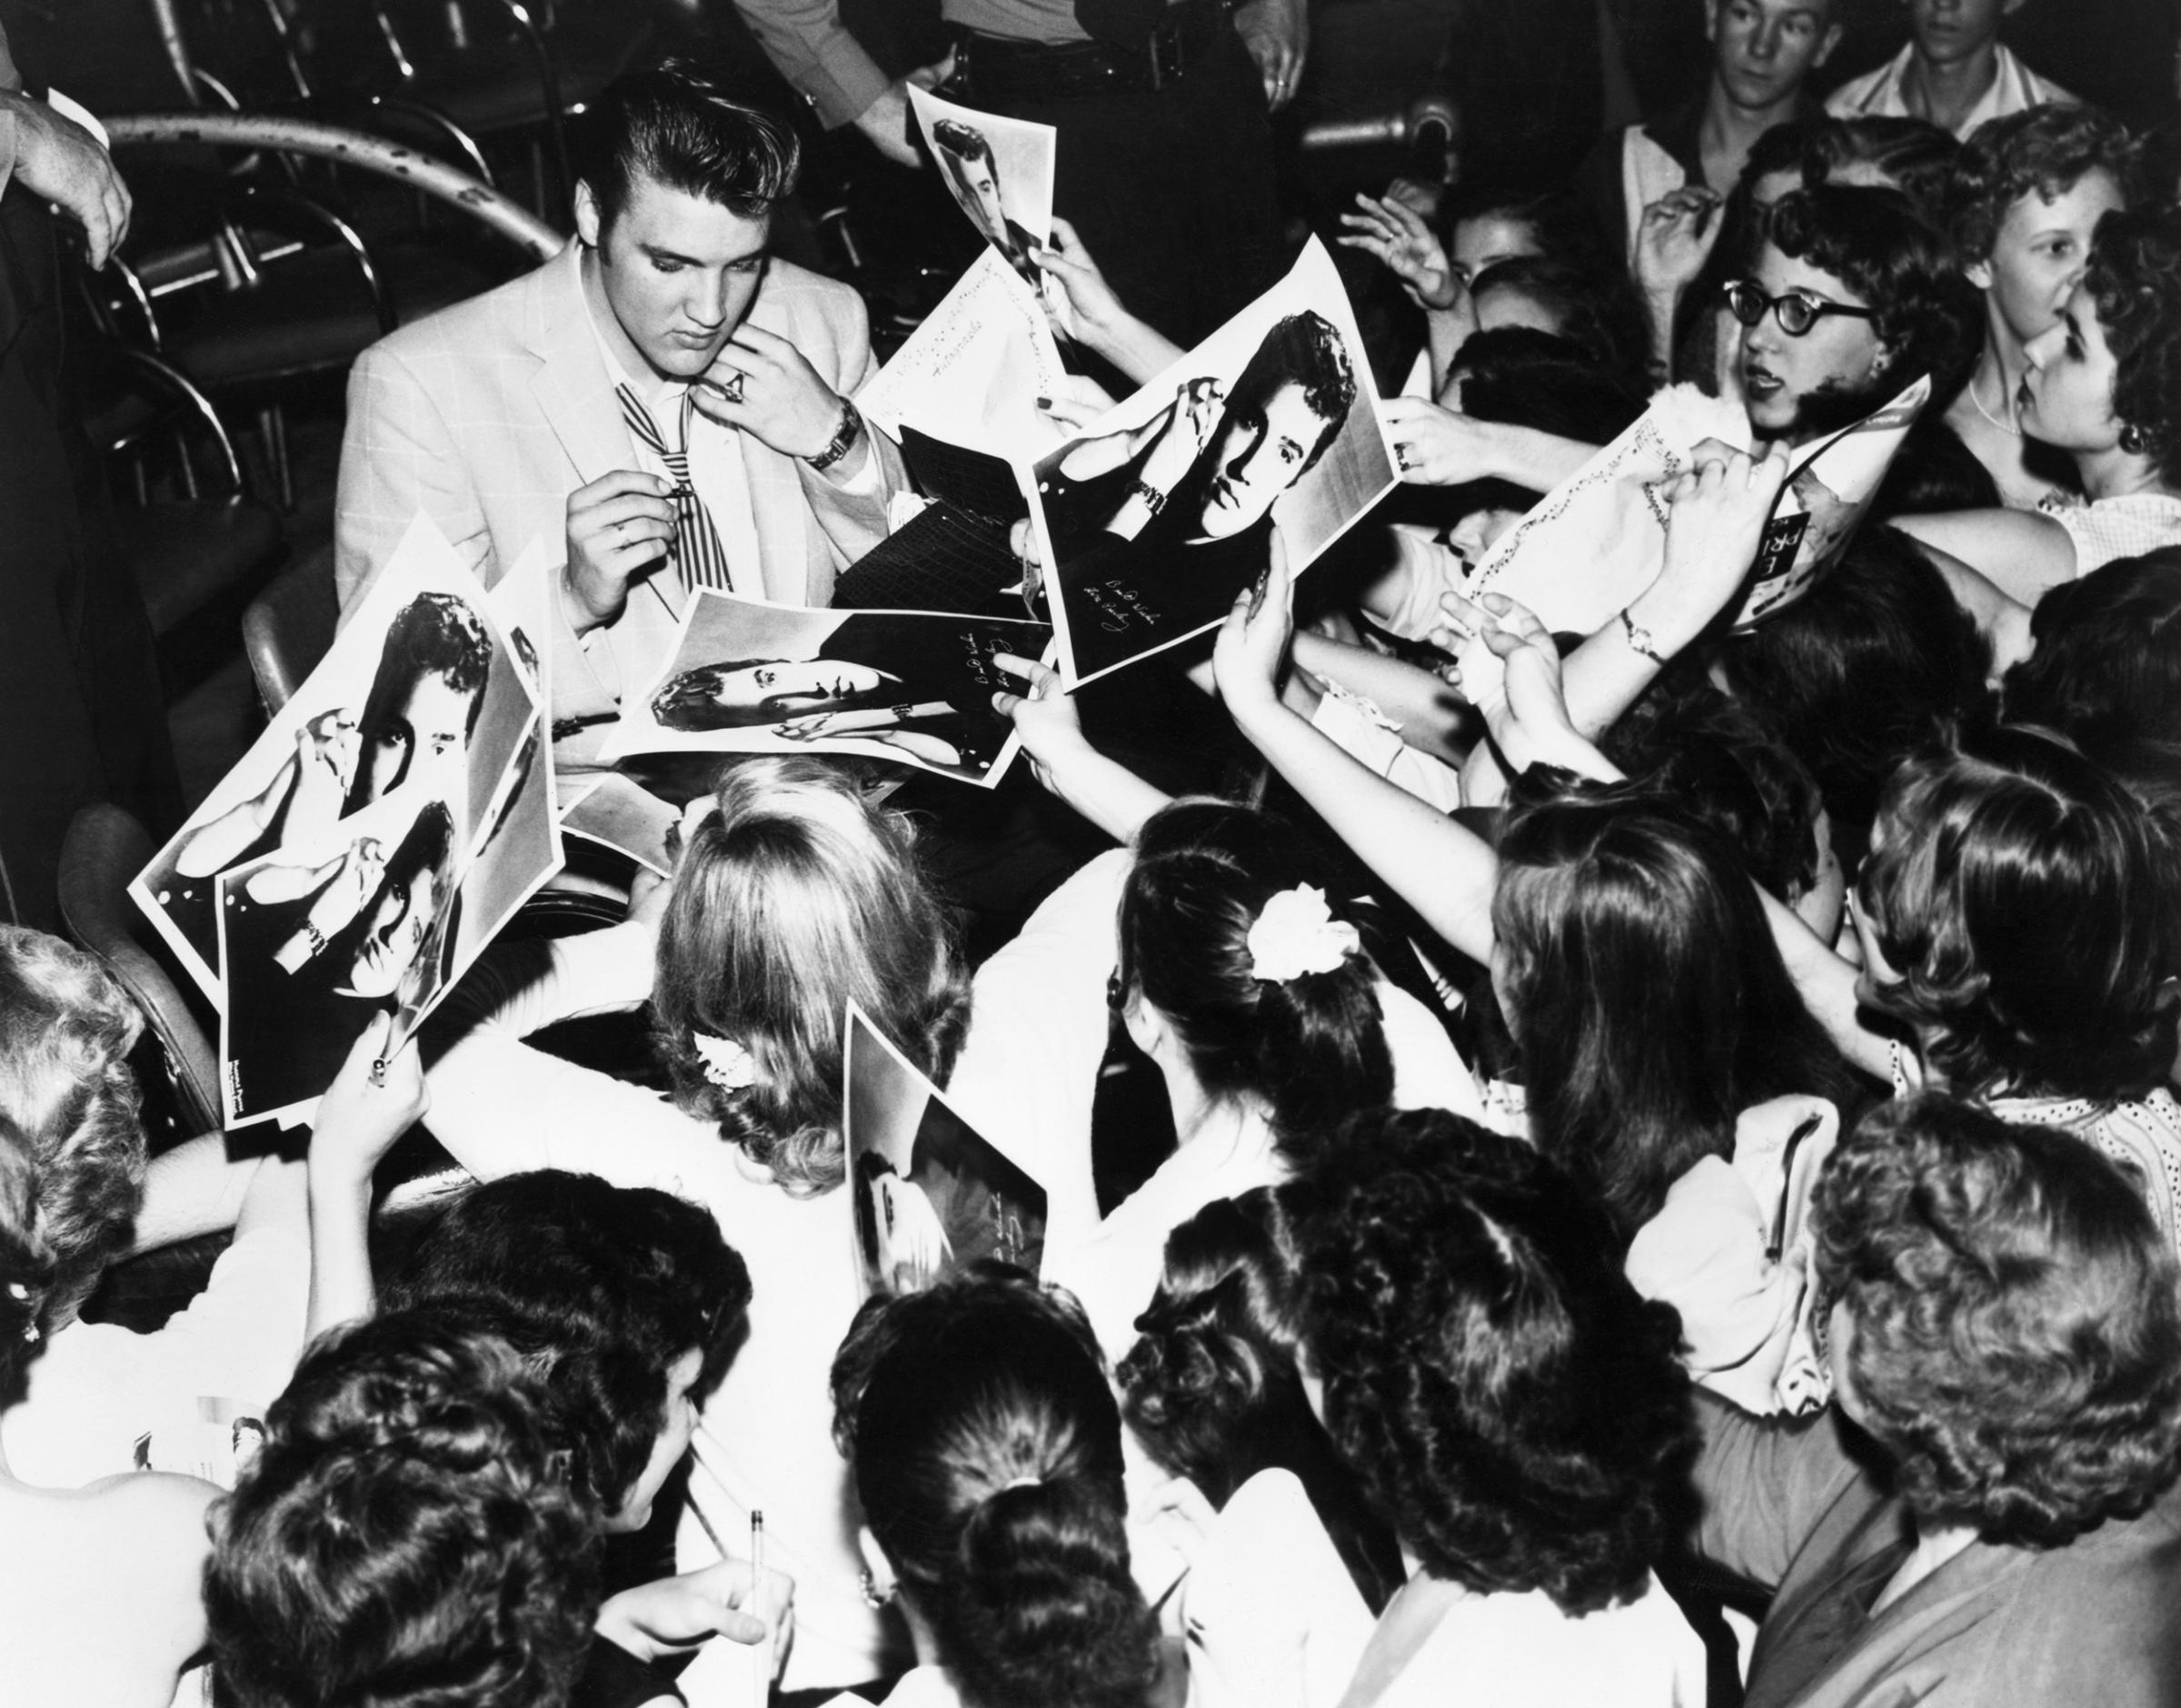 Elvis is surrounded by his enthusiastic teenage fans in Houston, TX., 1956.